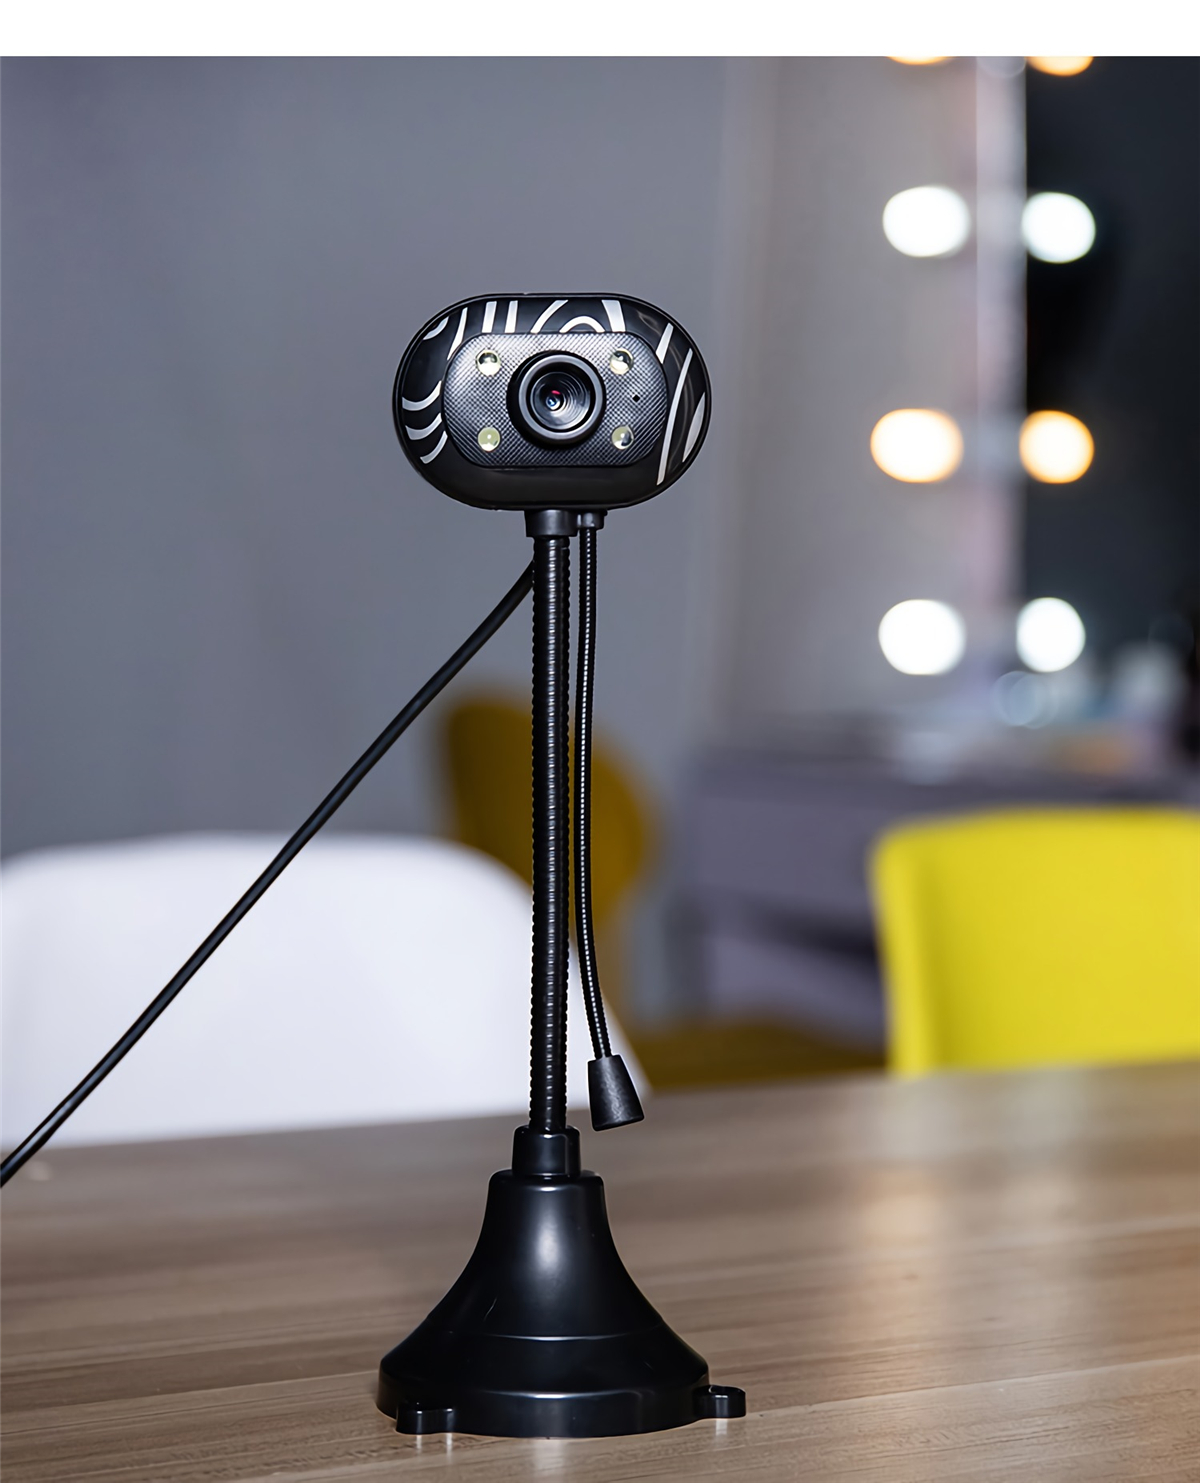 480P-HD-Webcam-CMOS-USB-20-Wired-Computer-Web-Camera-Built-in-Microphone-Camera-for-Desktop-Computer-1891956-13